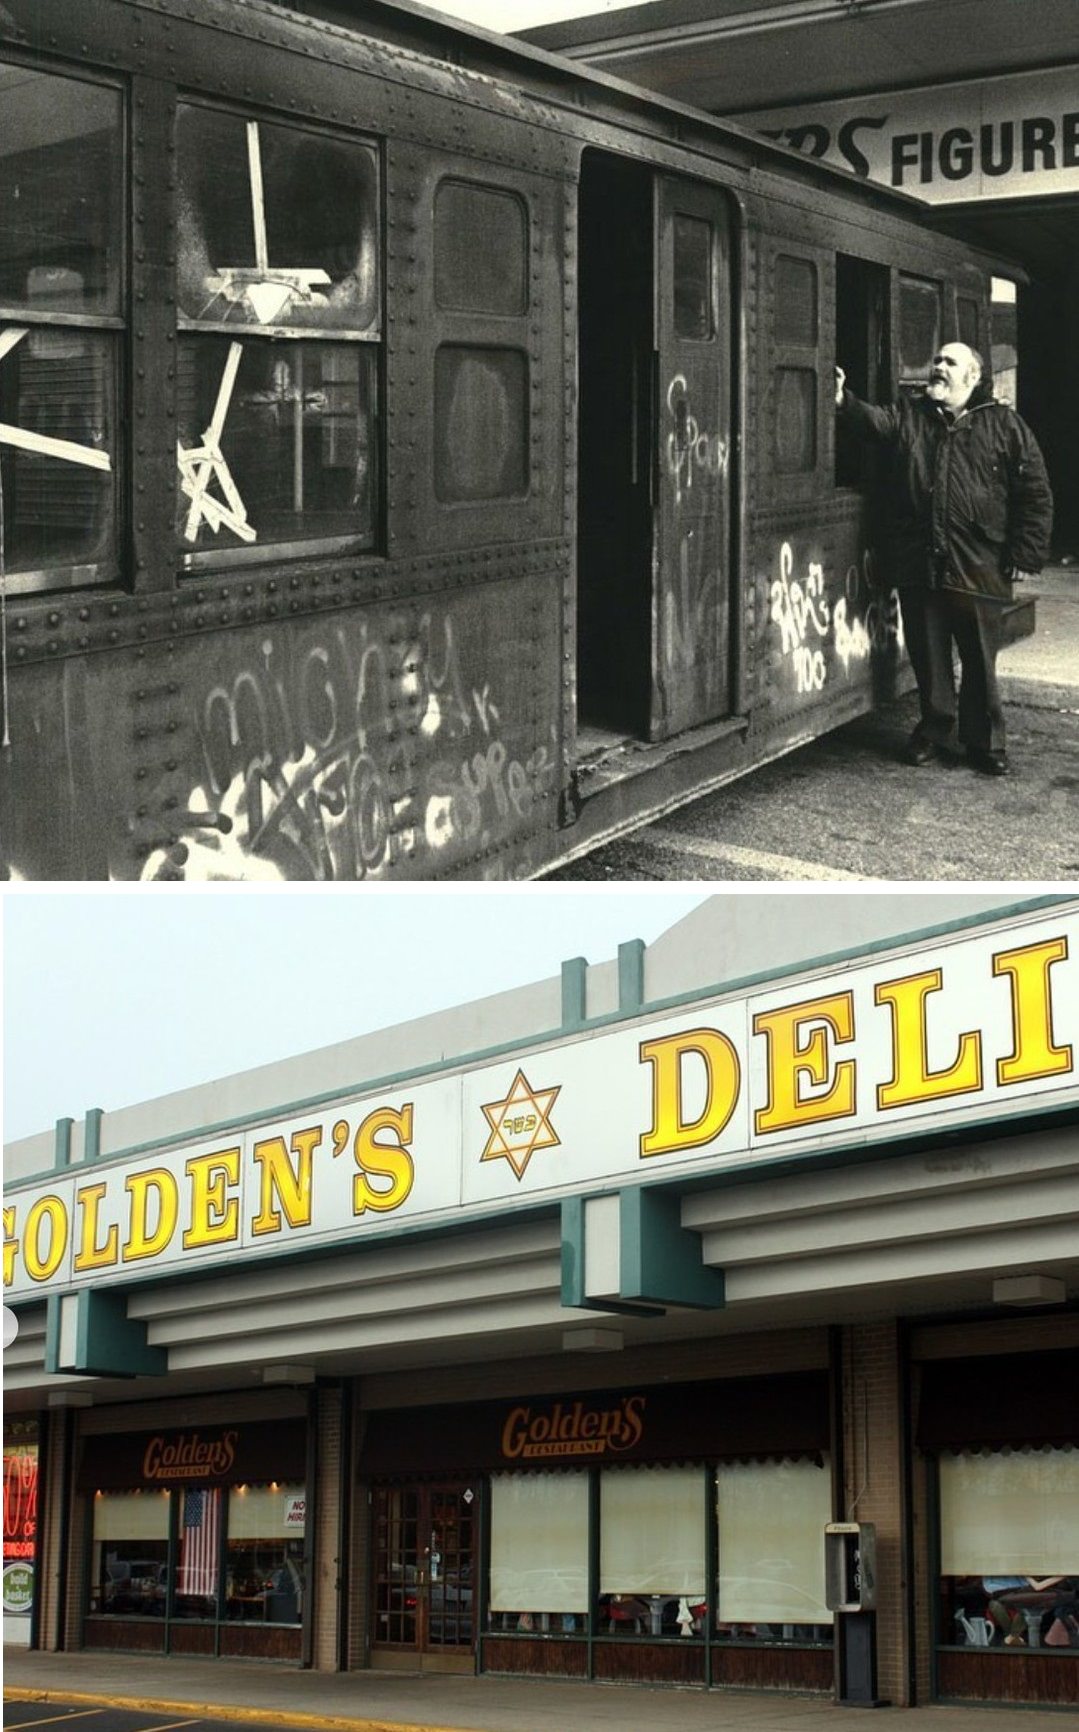 Marvin Golden'S Deli In New Springville Featured A 1930S Subway Car. Closed In 2012.